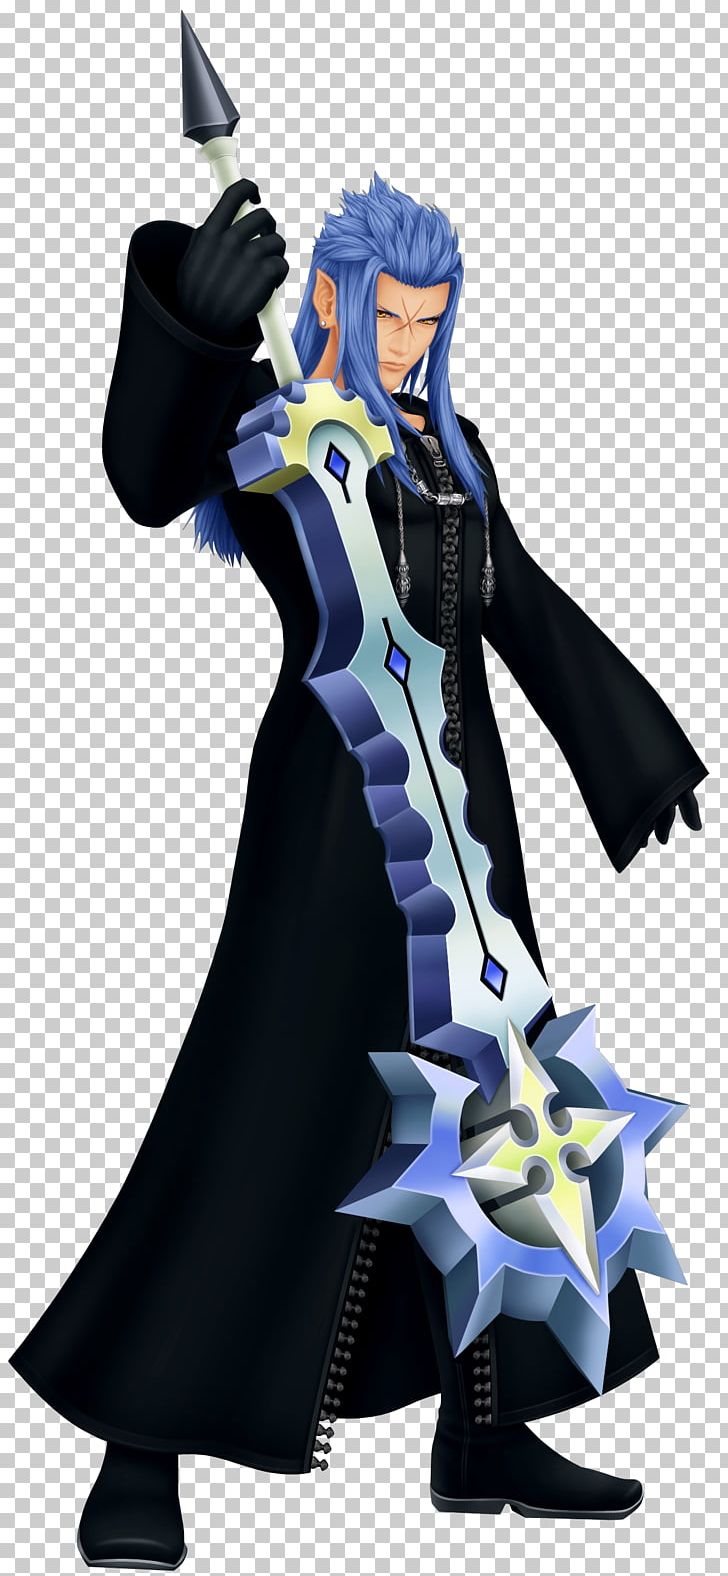 Kingdom Hearts III Kingdom Hearts 358/2 Days Kingdom Hearts 3D: Dream Drop Distance Kingdom Hearts HD 1.5 Remix PNG, Clipart, Action Figure, Berserker, Boss, Fictional Character, Figurine Free PNG Download